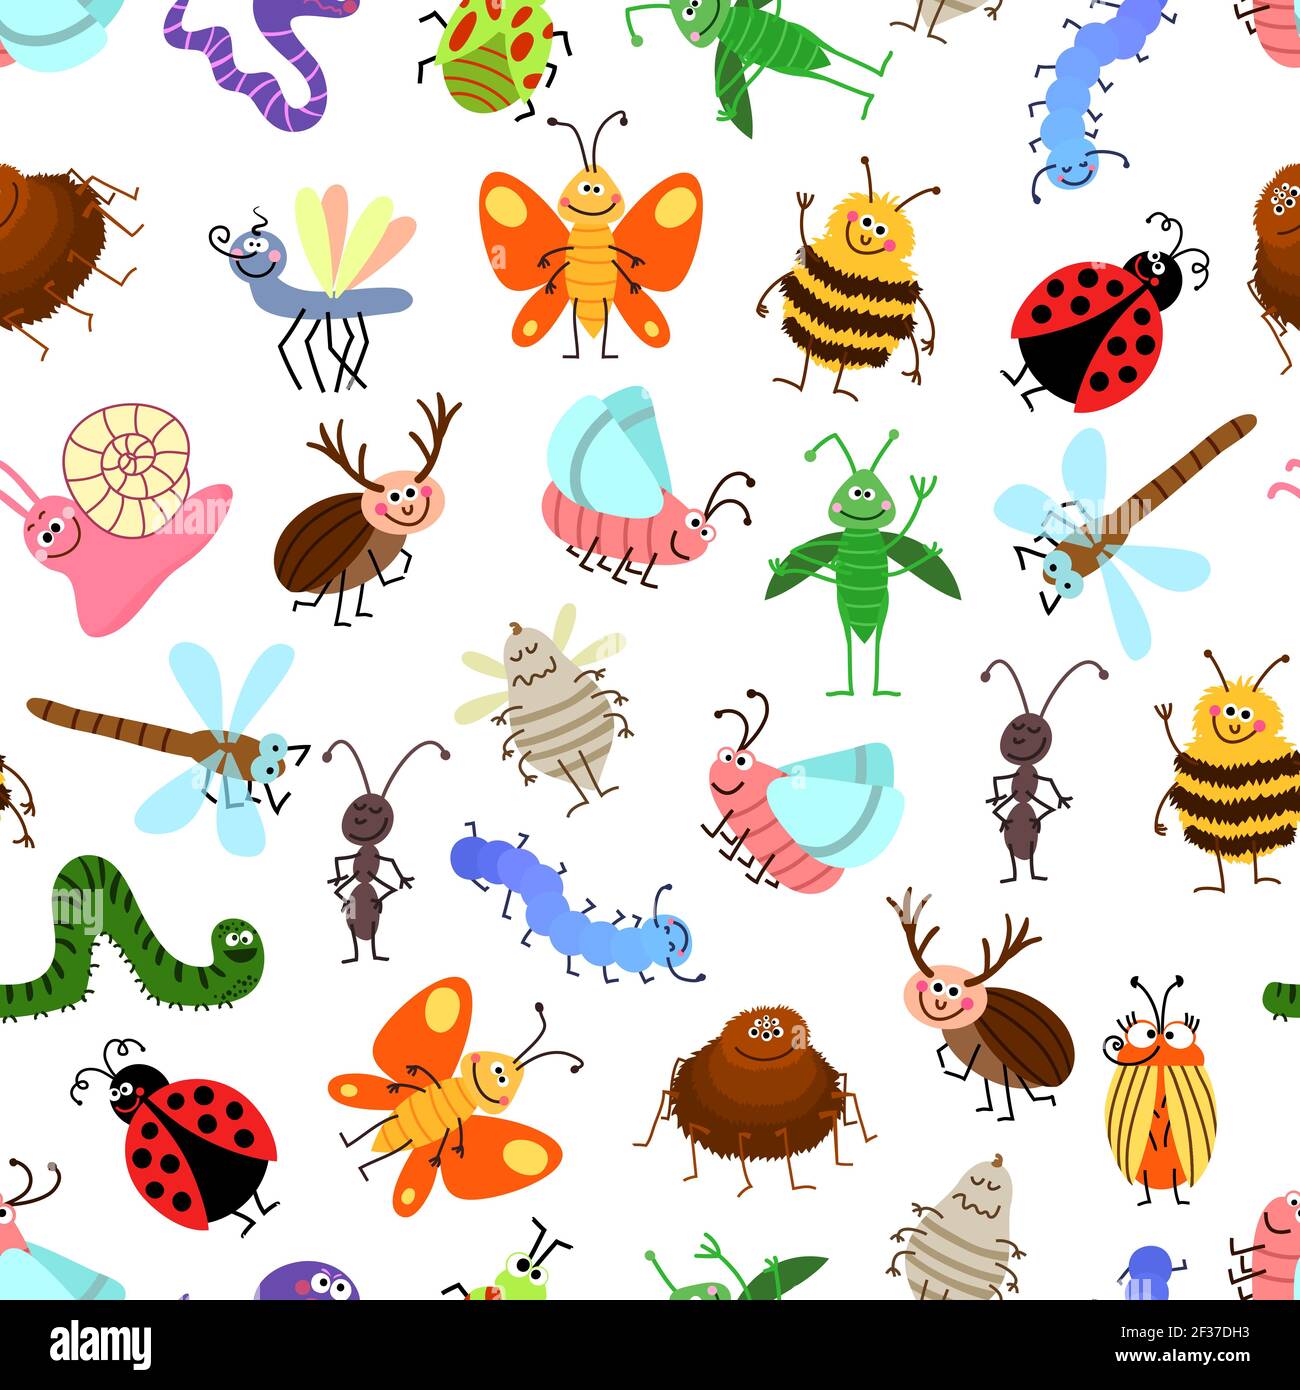 Fly and creeping cute cartoon insects vector pattern for happy